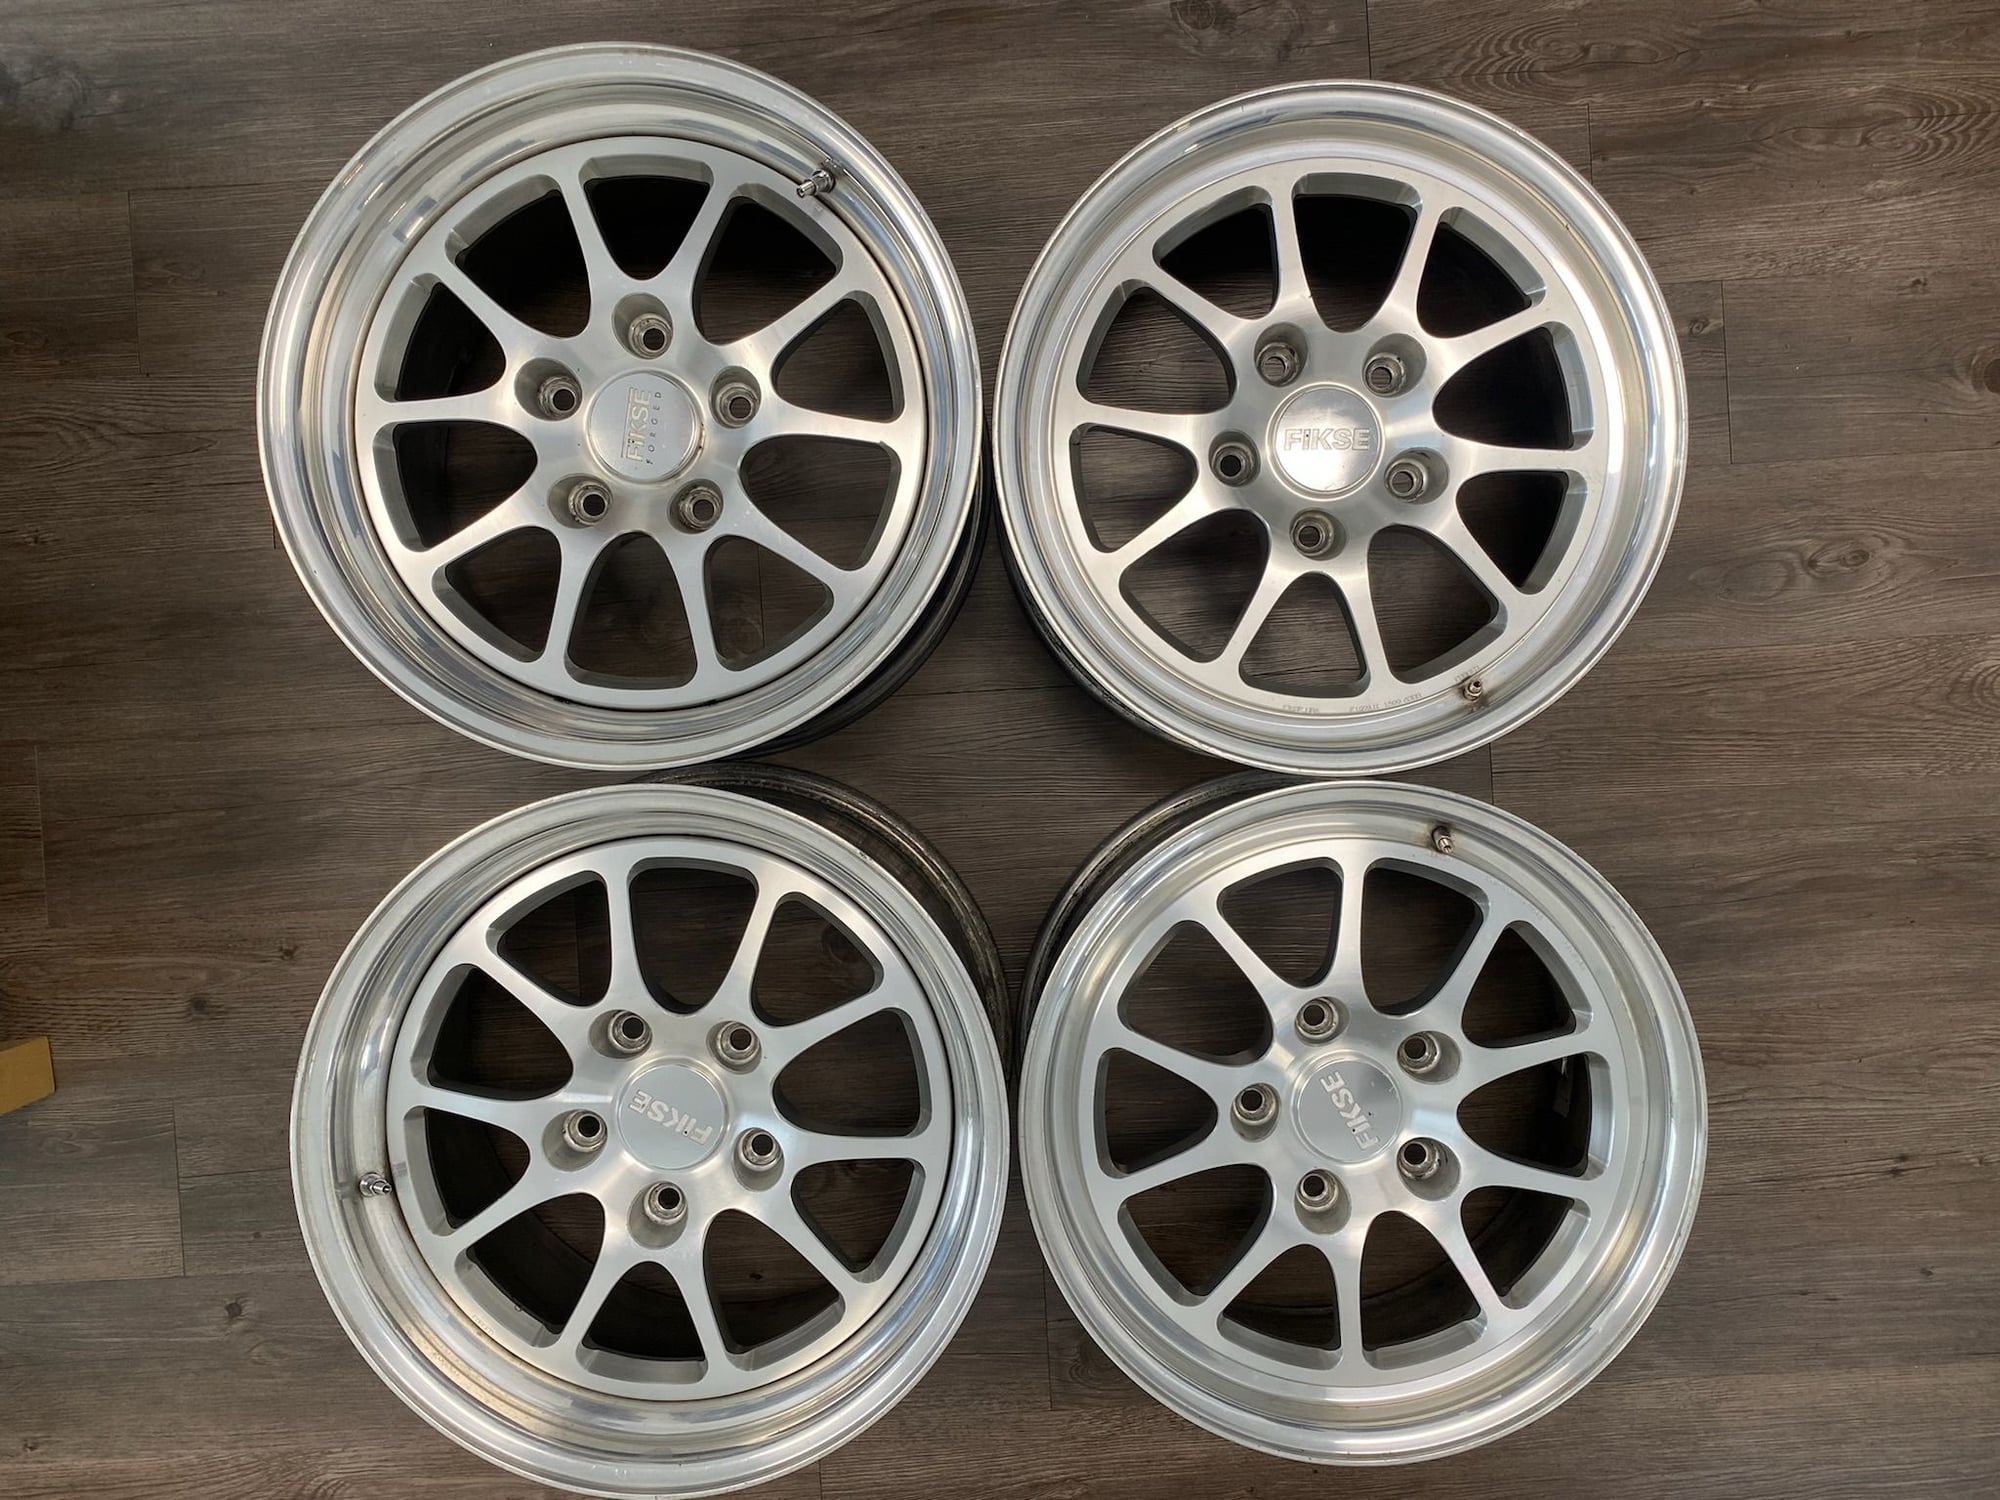 Wheels and Tires/Axles - Fikse Mach-V Forged 17" Wheels set of 4 8.5" Front/10.5" Rear - Used - 0  All Models - Dallas, TX 75231, United States